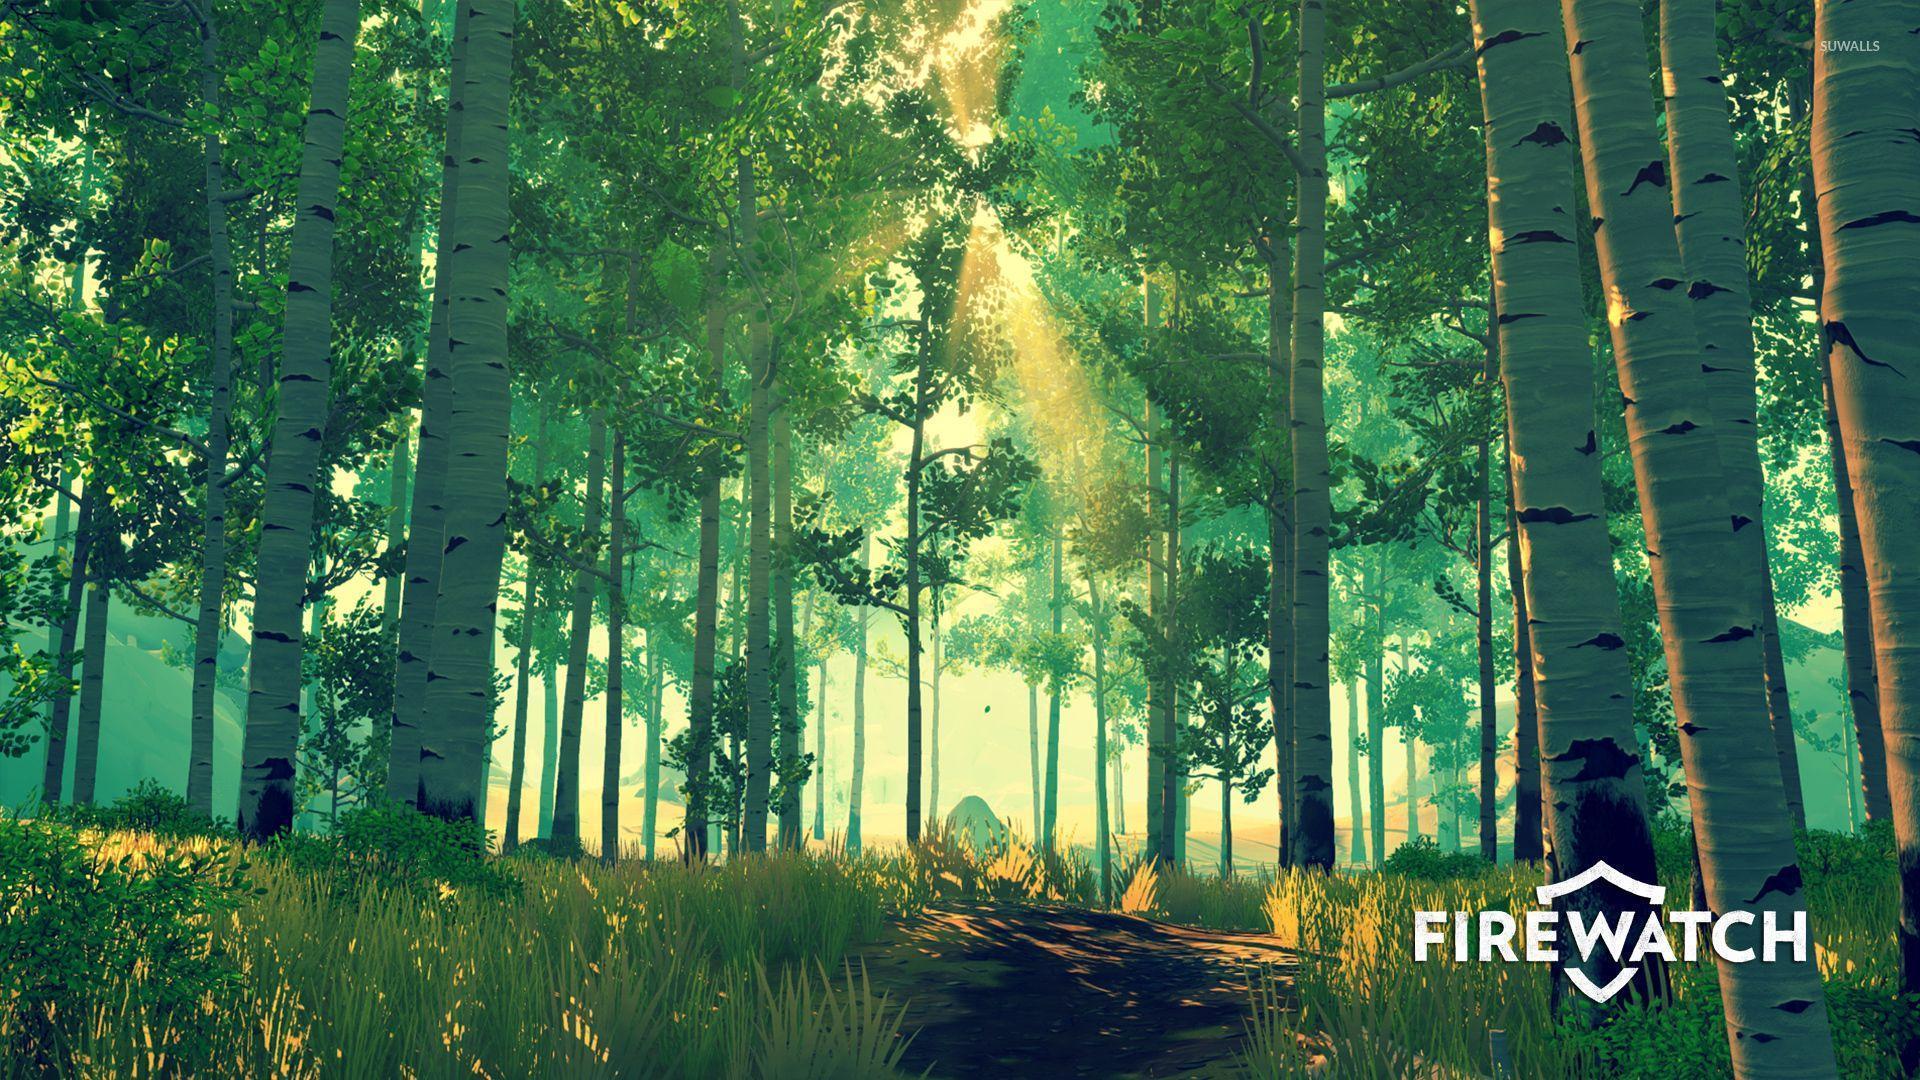 Sun rays in the green forest in Firewatch wallpaper wallpaper